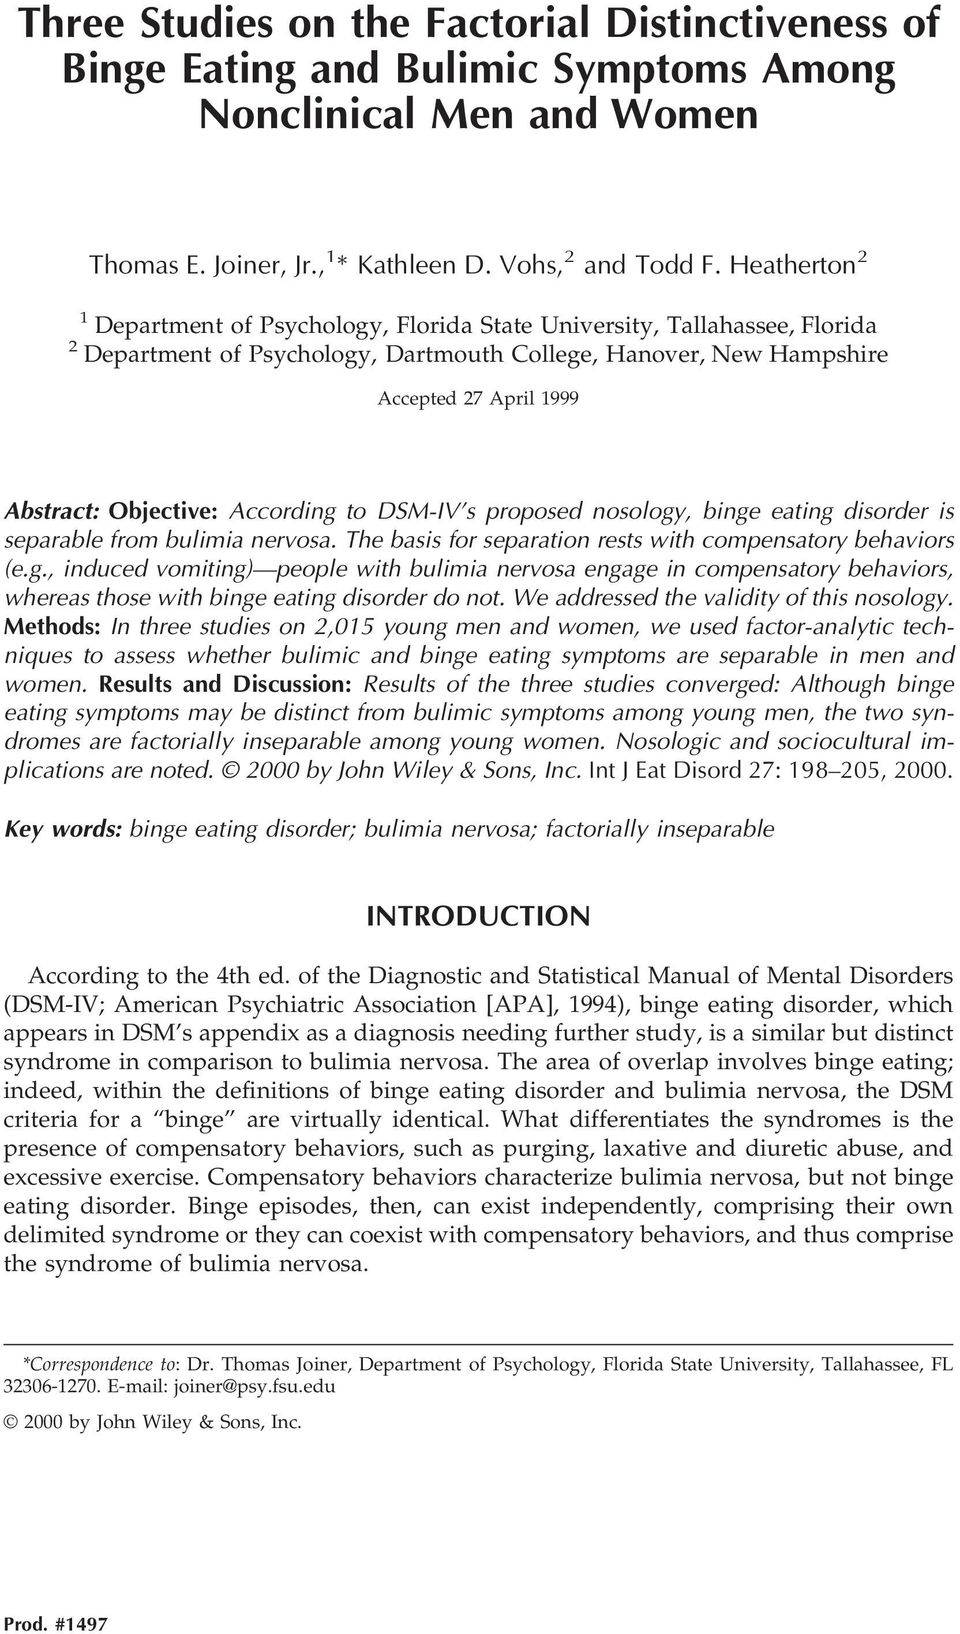 Objective: According to DSM-IV s proposed nosology, binge eating disorder is separable from bulimia nervosa. The basis for separation rests with compensatory behaviors (e.g., induced vomiting) people with bulimia nervosa engage in compensatory behaviors, whereas those with binge eating disorder do not.